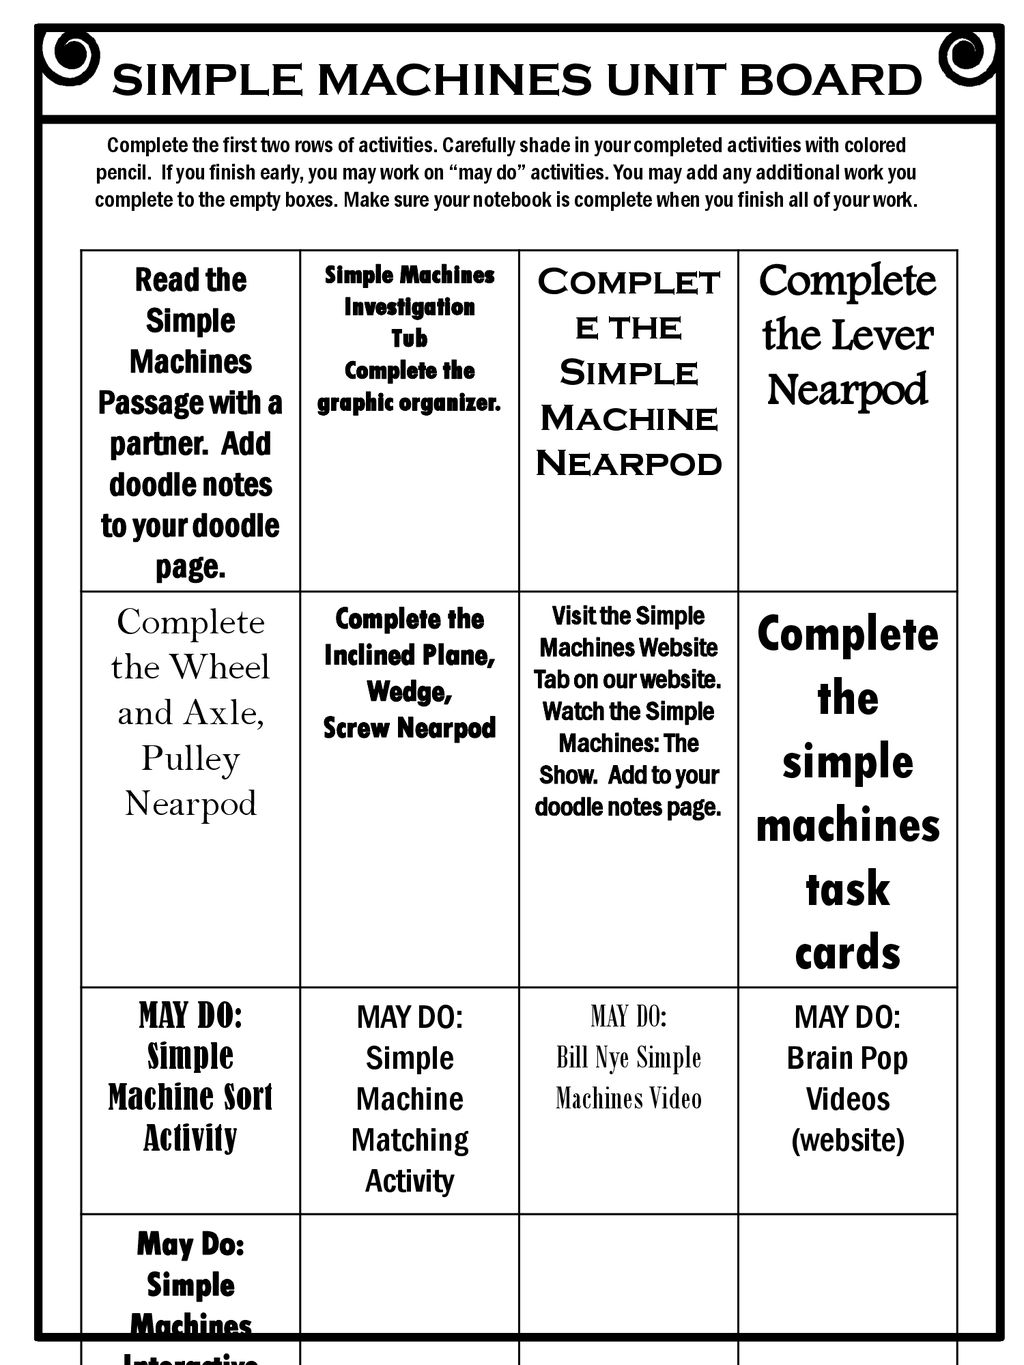 Complete The Simple Machines Task Cards Ppt Download